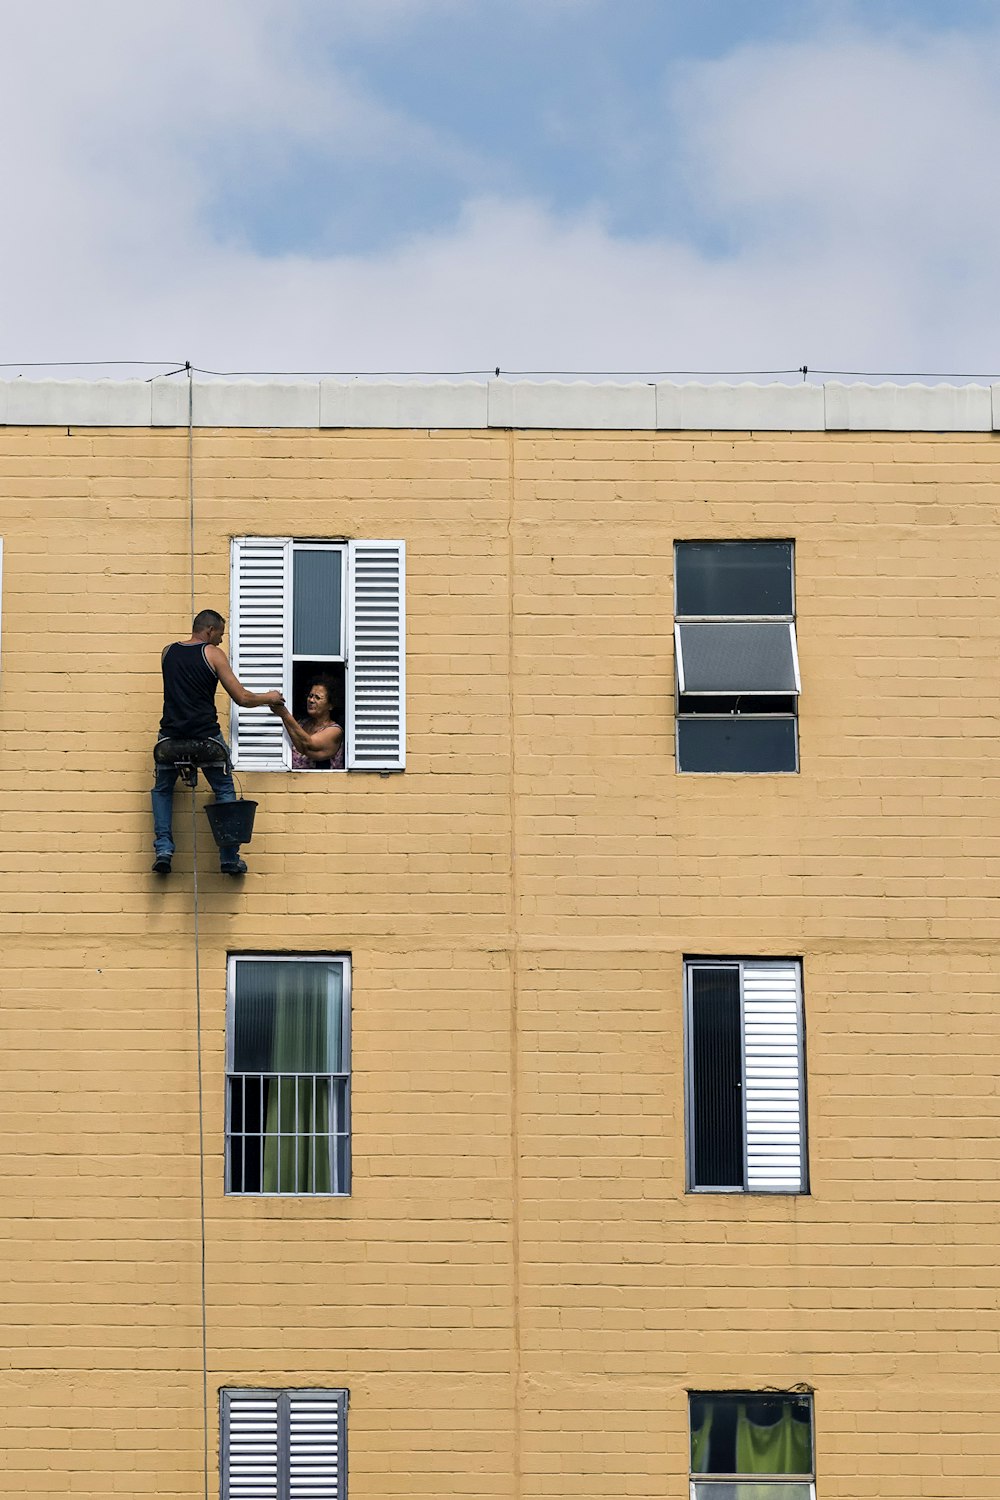 man hanging on building near woman in window during daytime